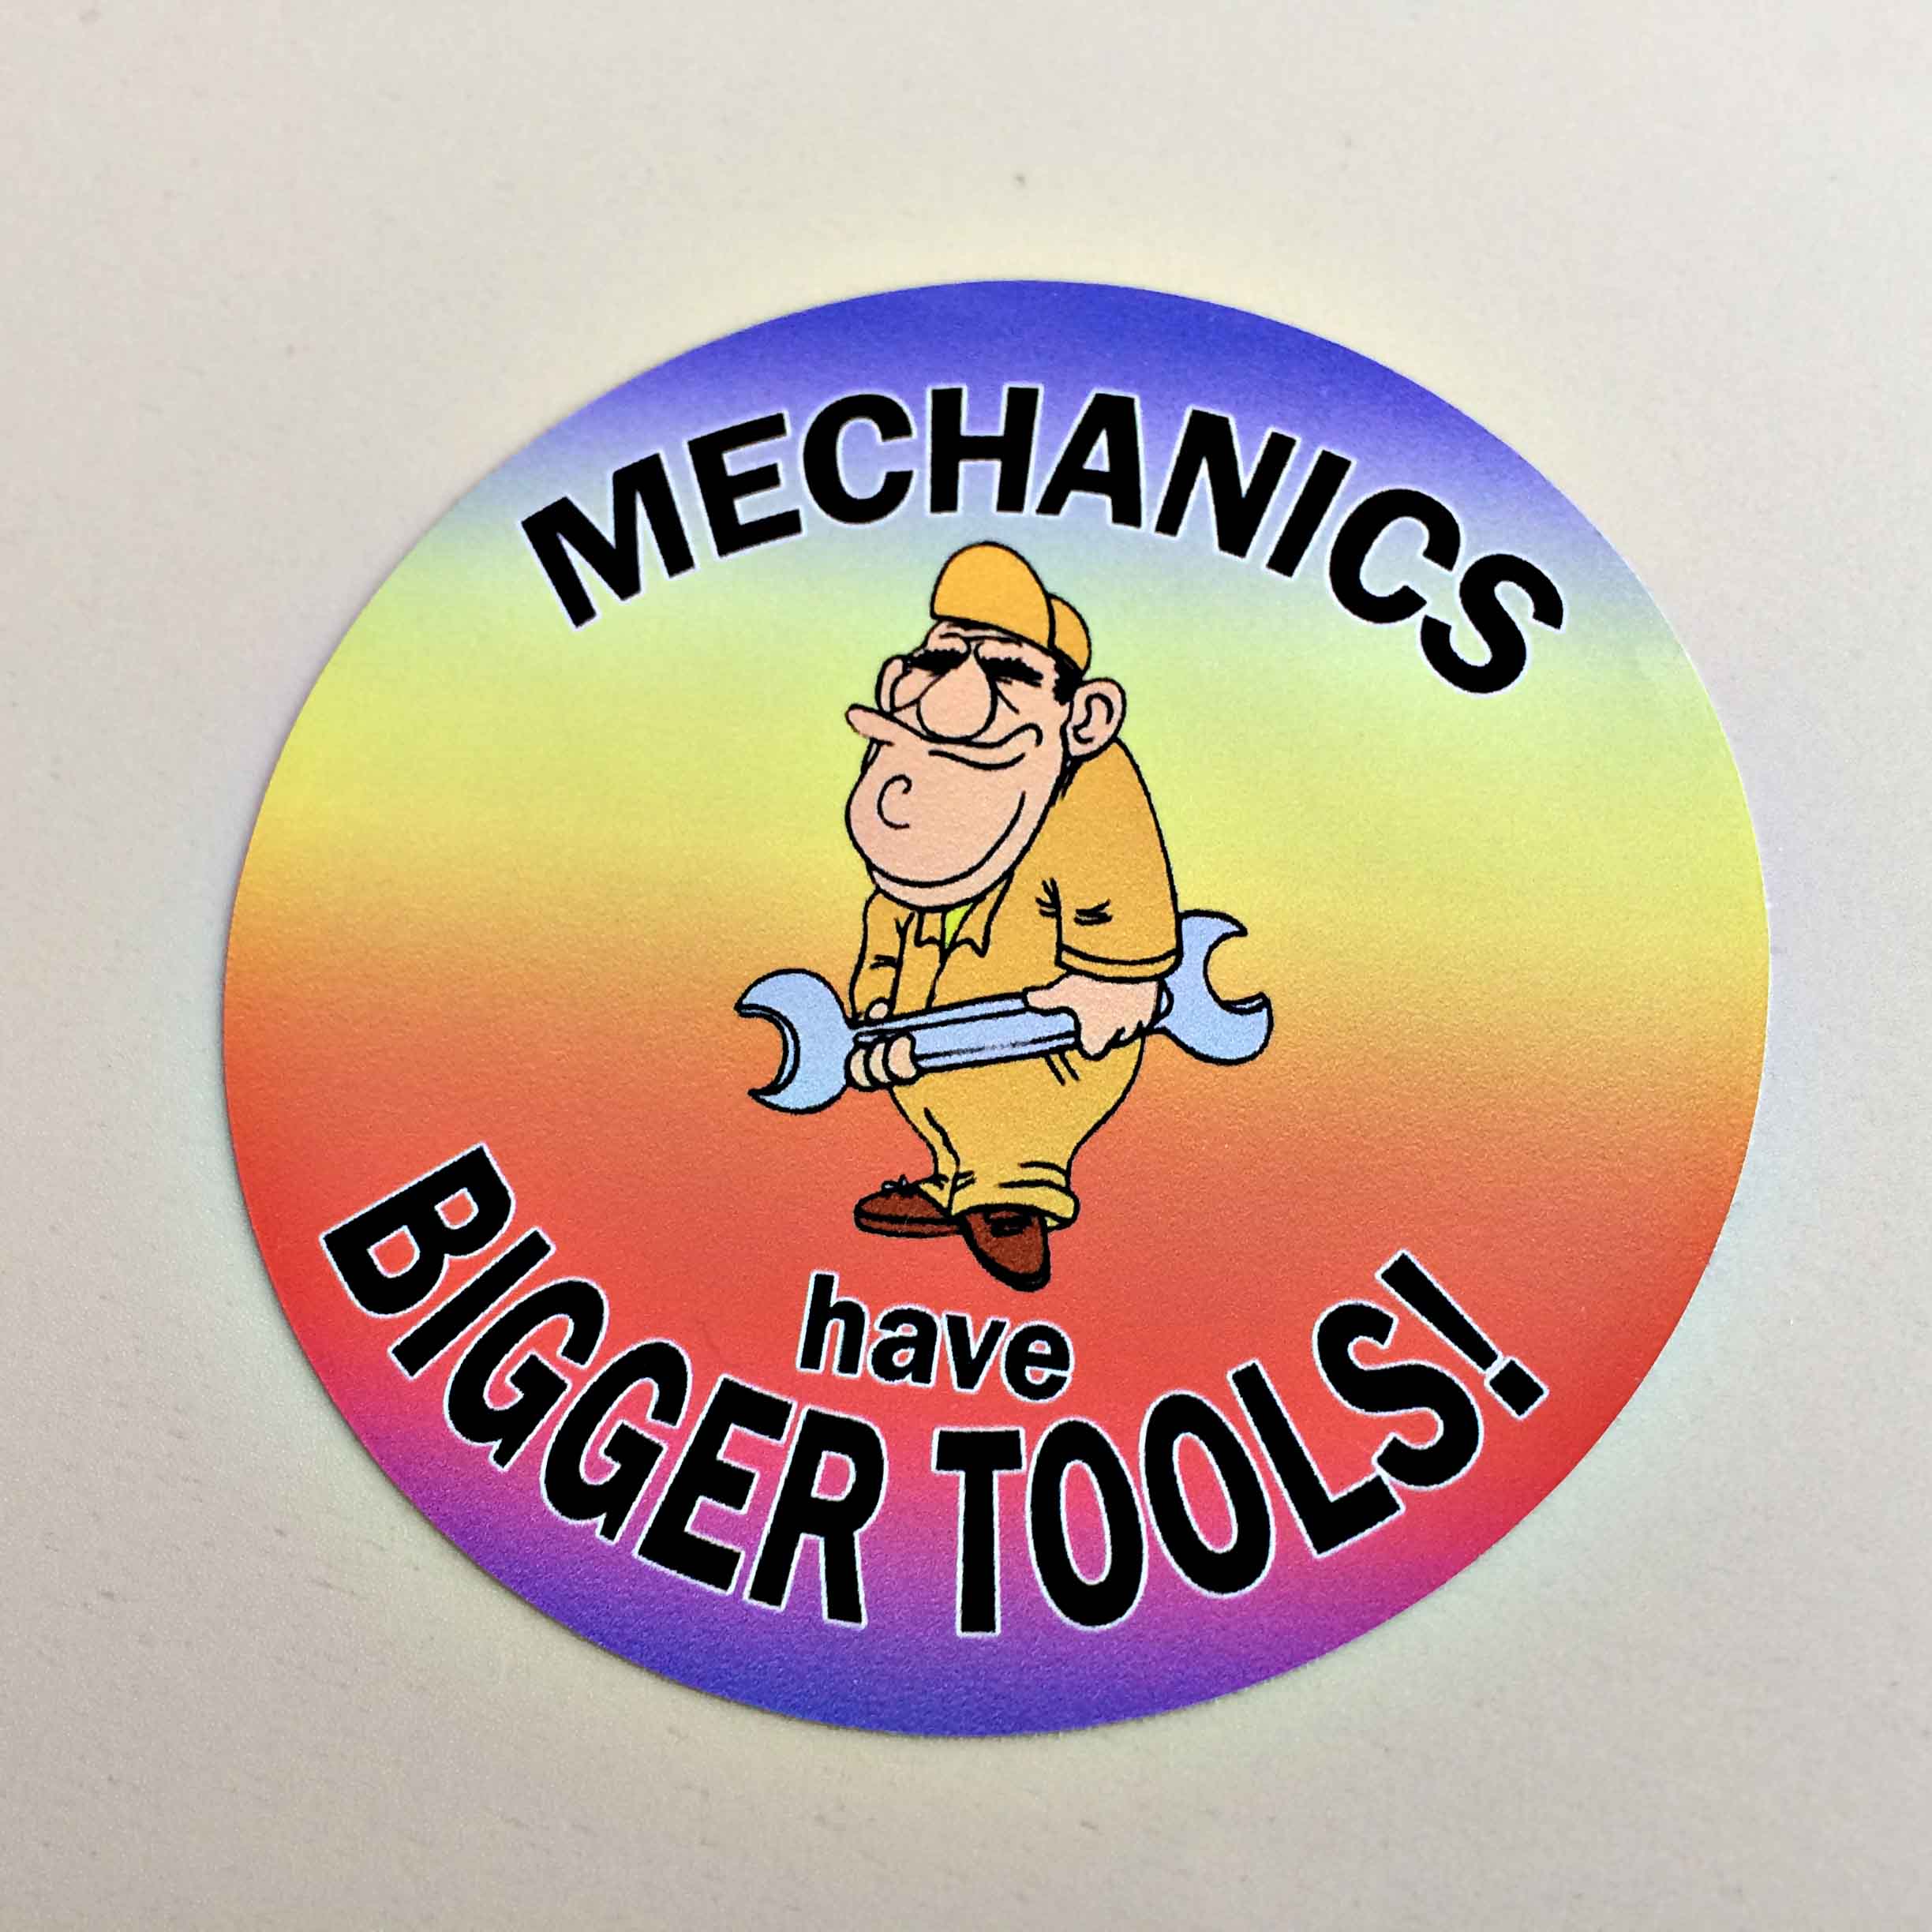 BIGGER TOOLS STICKER! Humorous cartoon character of a man holding a spanner on a rainbow coloured background. With the wording Mechanics Have Bigger Tools surrounding the image.